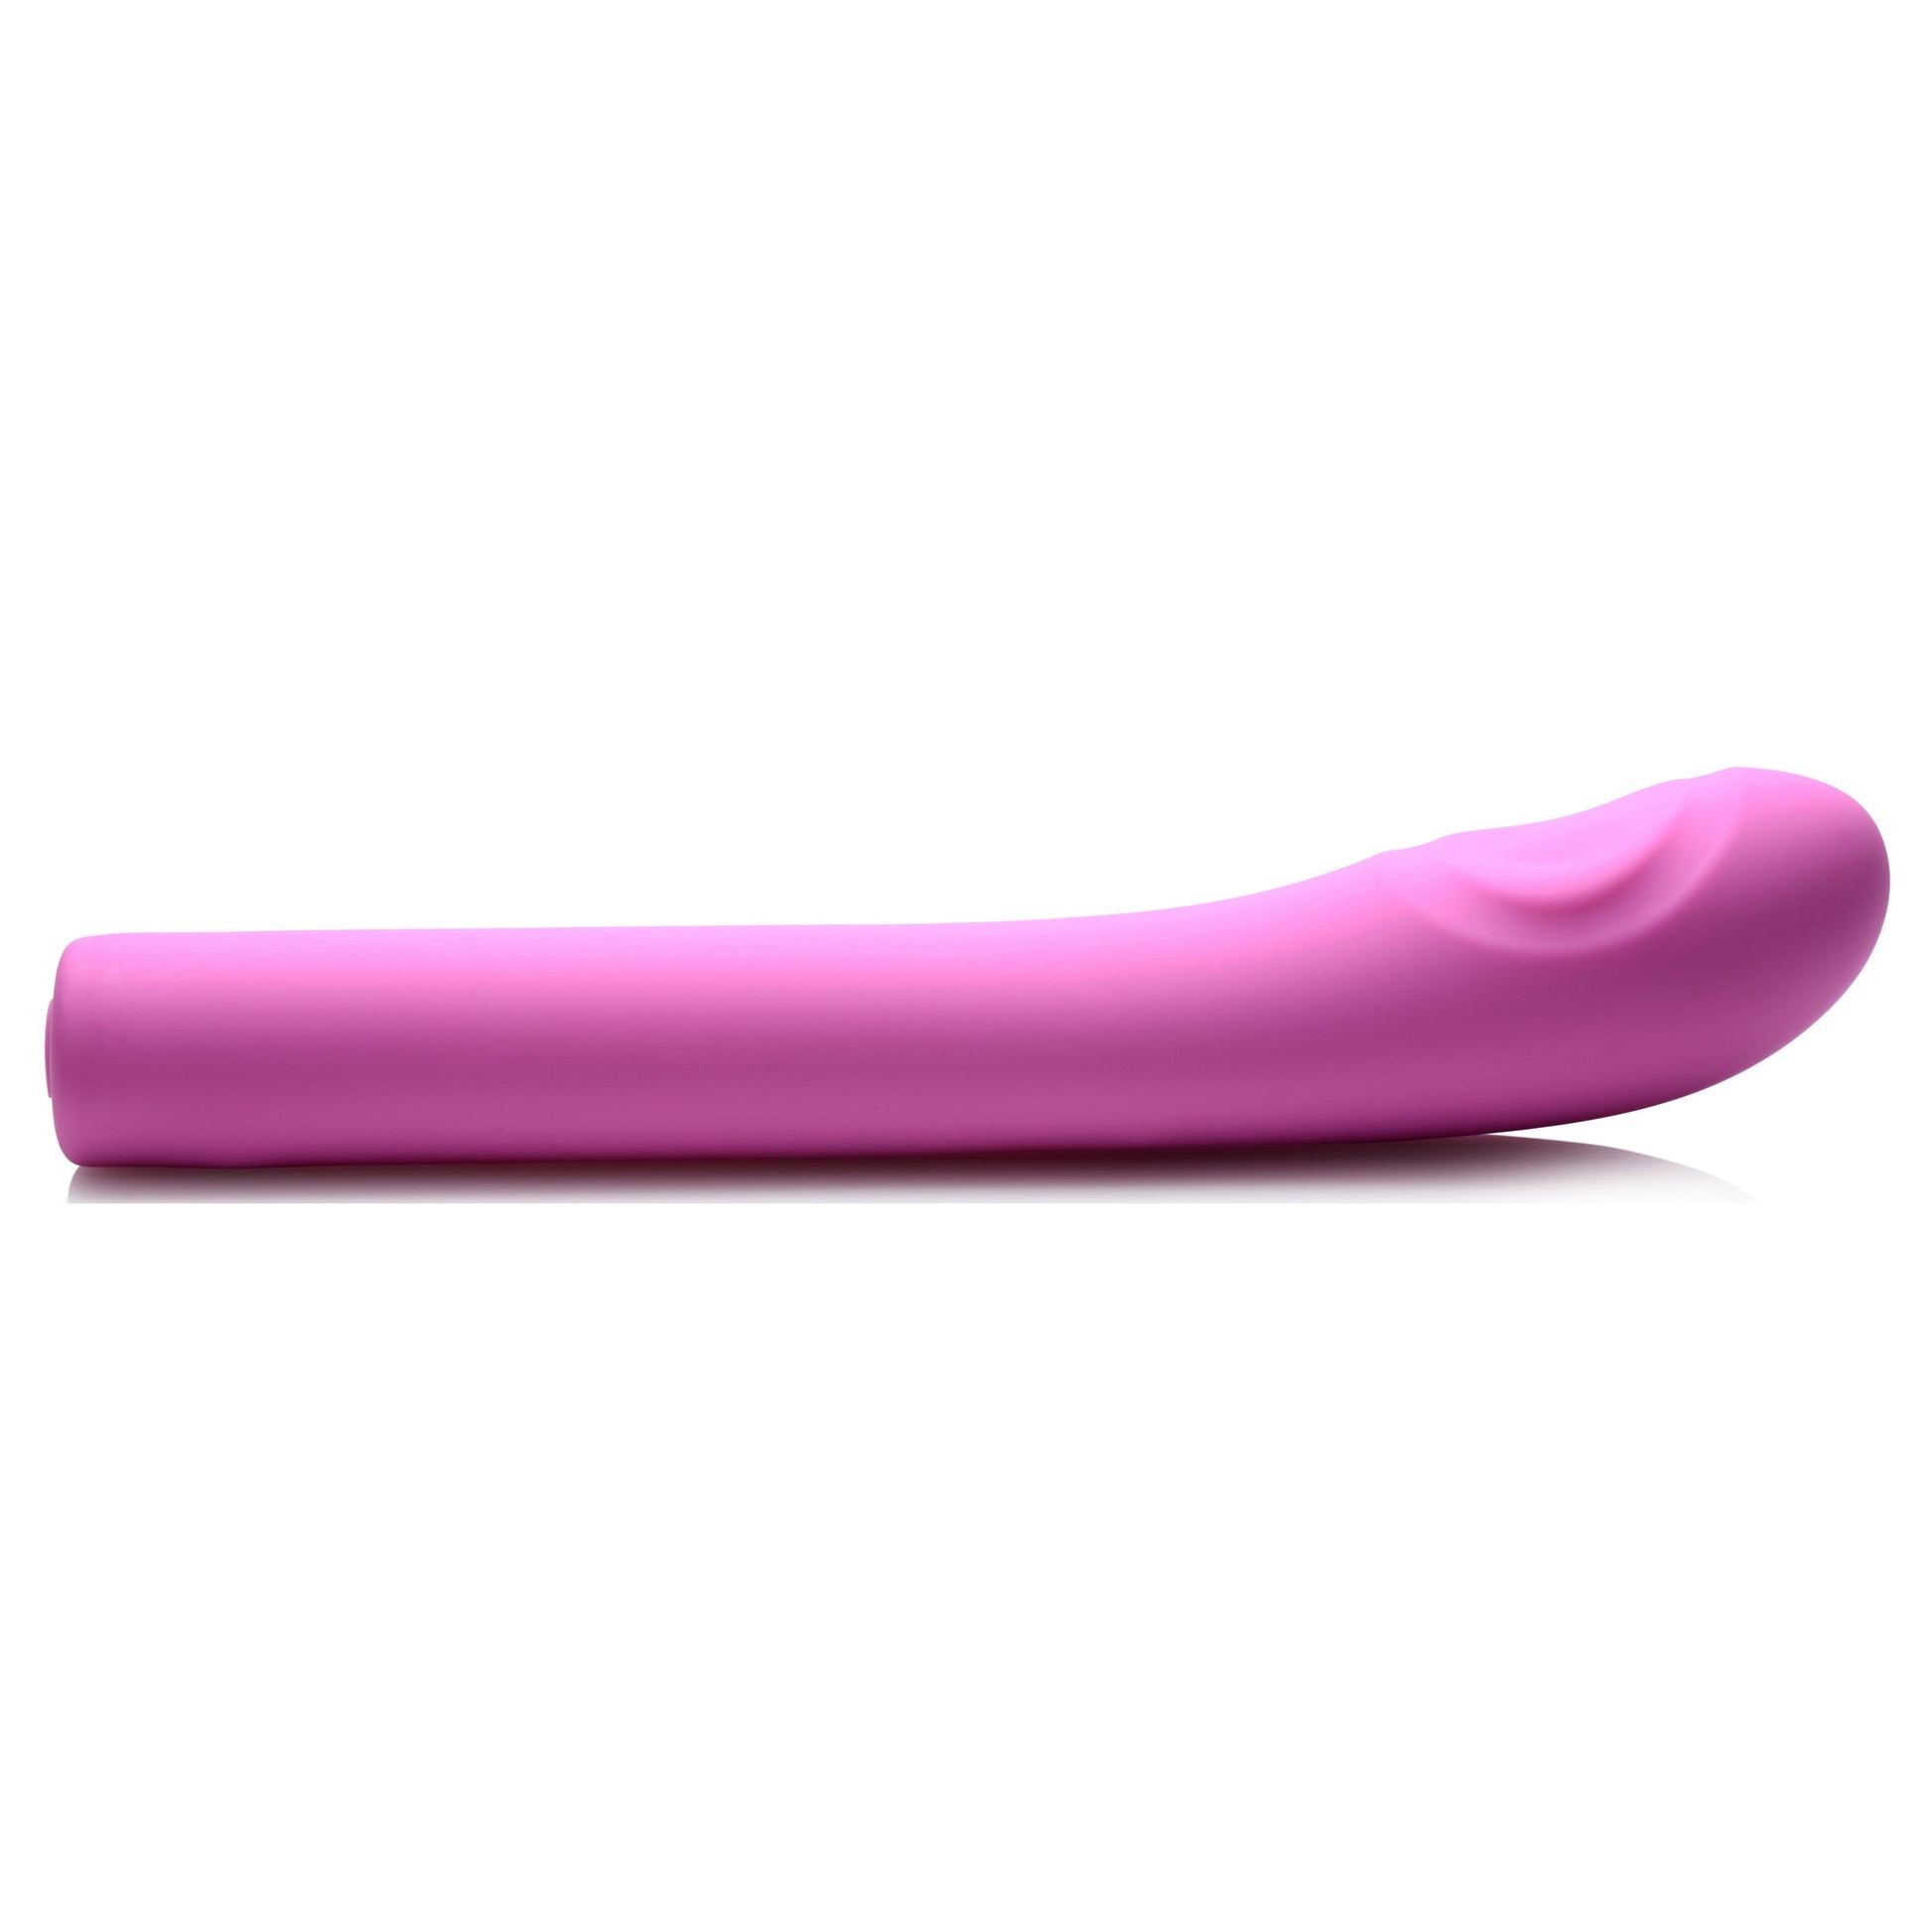 5 Star 9x Pulsing G-Spot Silicone Vibrator - Pink